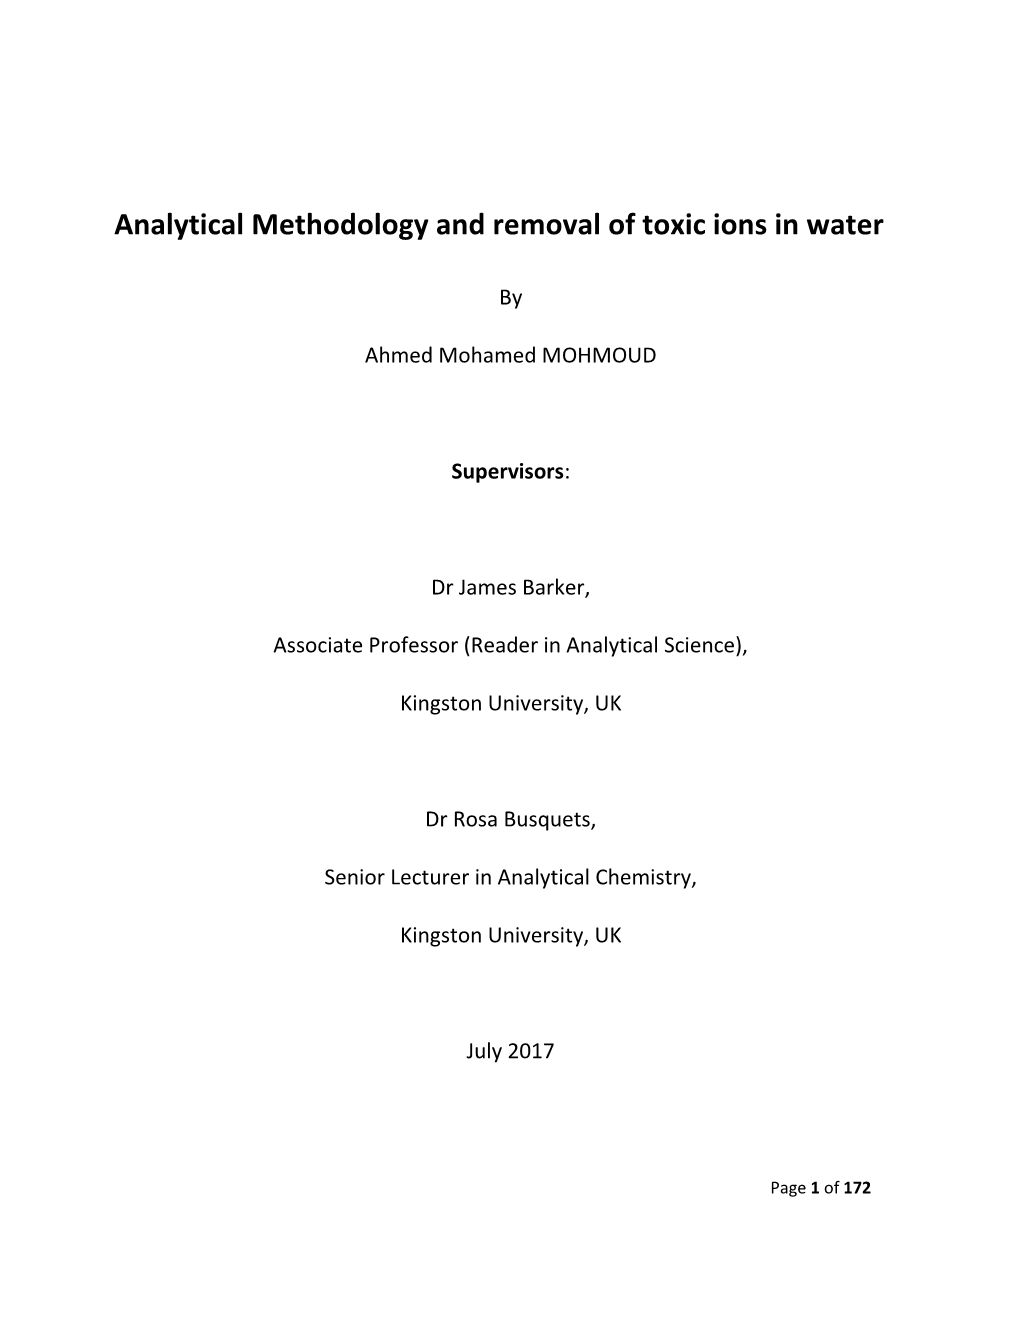 Analytical Methodology and Removal of Toxic Ions in Water